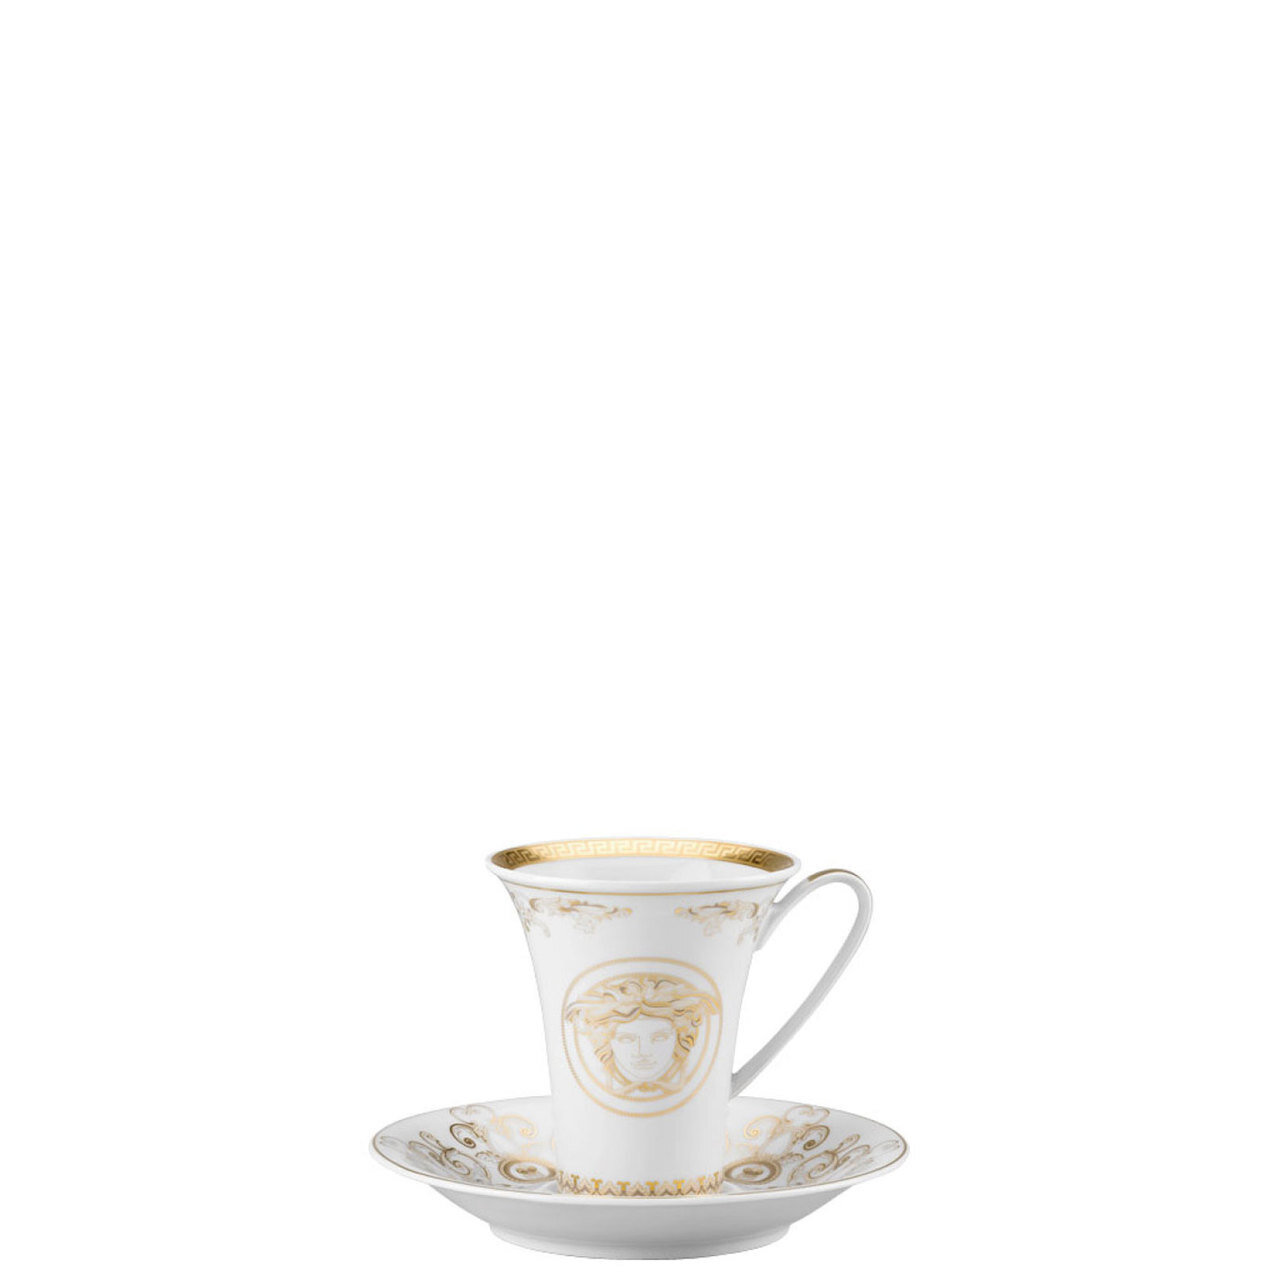 Versace Medusa Gala Gold Coffee Cup and Saucer 6 Inch 6 oz.